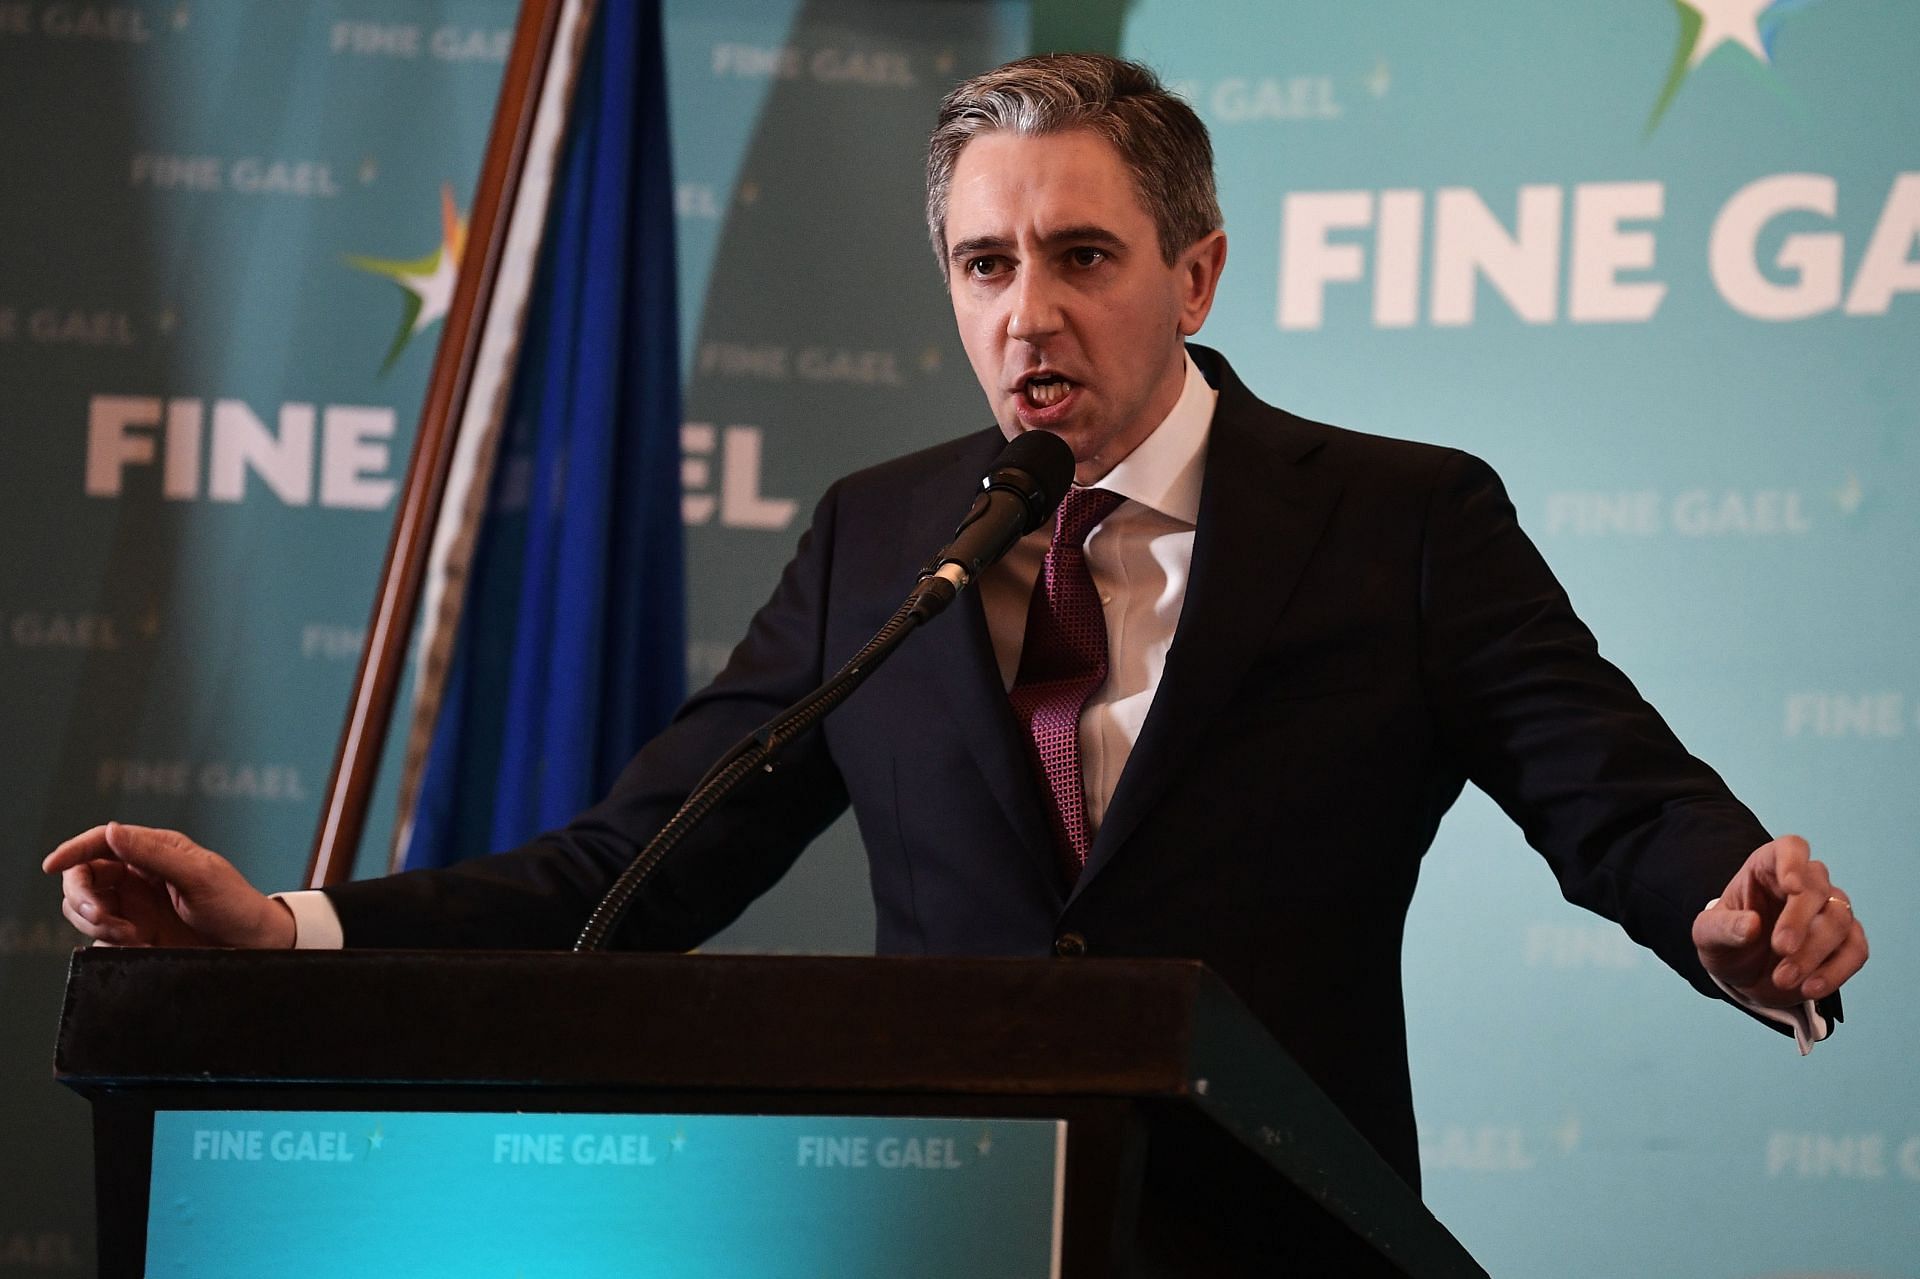 Harris during his speech after being announced the leader of Fine Gael (Image via Getty Images)